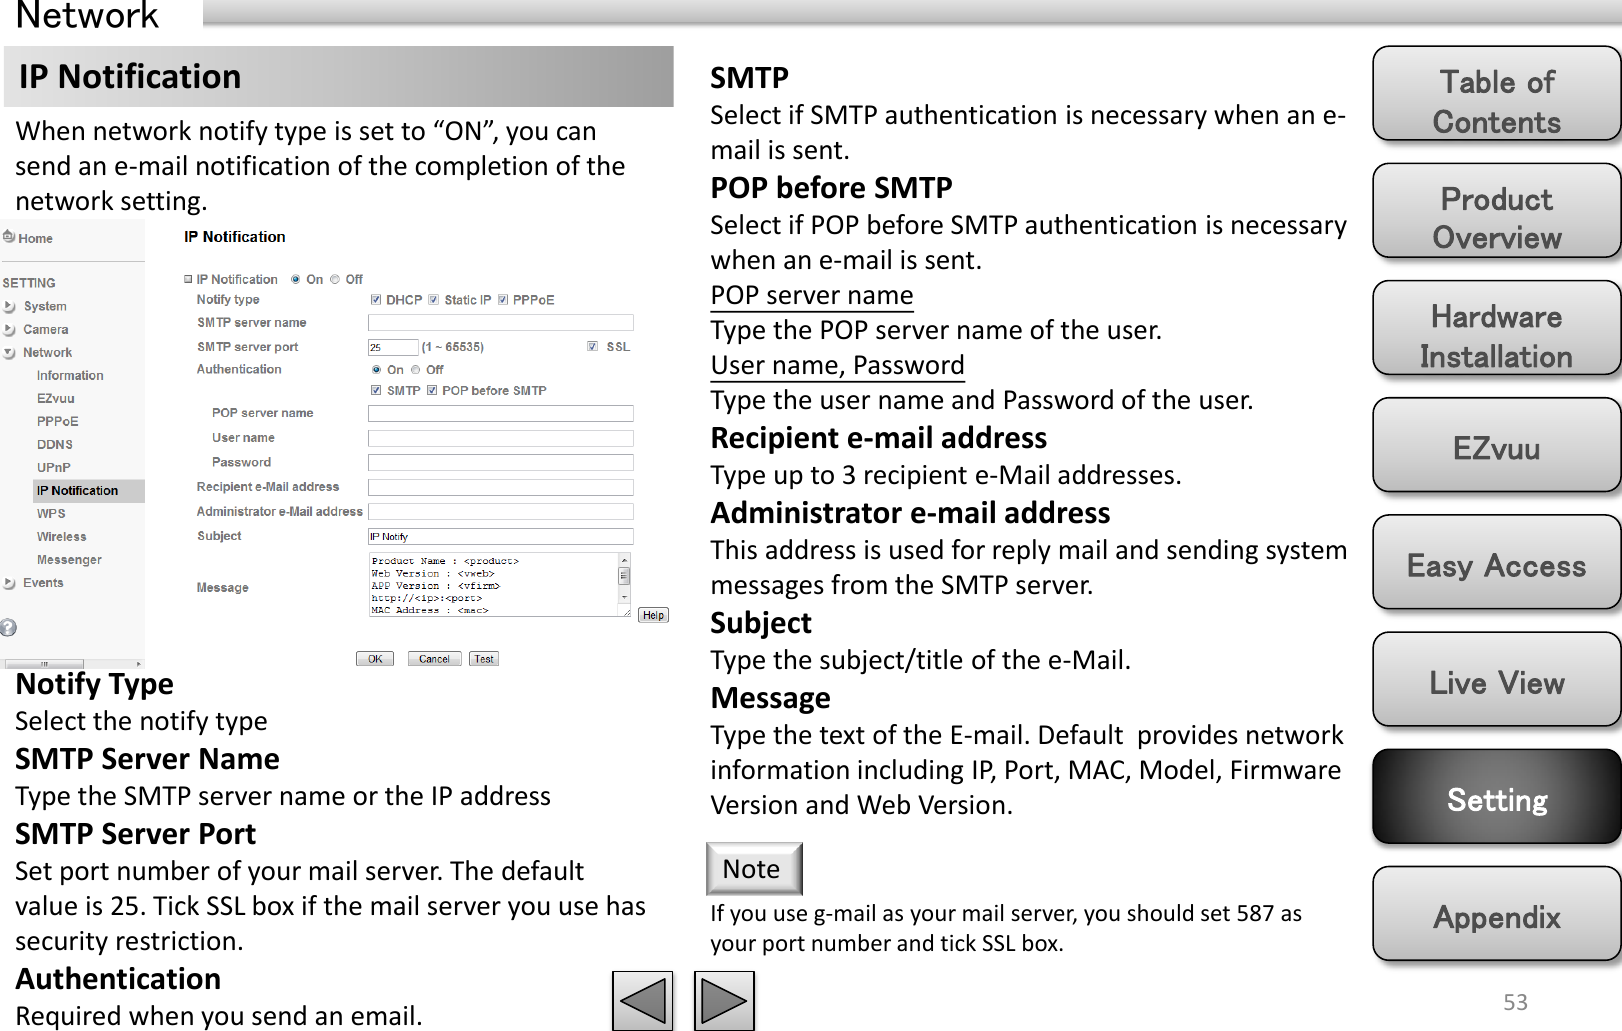 Product Overview Hardware Installation Easy Access EZvuu Setting Live View Appendix Table of Contents 53 Network IP Notification  SMTP Select if SMTP authentication is necessary when an e-mail is sent. POP before SMTP Select if POP before SMTP authentication is necessary when an e-mail is sent. POP server name Type the POP server name of the user. User name, Password Type the user name and Password of the user. Recipient e-mail address Type up to 3 recipient e-Mail addresses.  Administrator e-mail address This address is used for reply mail and sending system messages from the SMTP server. Subject Type the subject/title of the e-Mail.  Message Type the text of the E-mail. Default  provides network information including IP, Port, MAC, Model, Firmware Version and Web Version. When network notify type is set to “ON”, you can send an e-mail notification of the completion of the network setting. If you use g-mail as your mail server, you should set 587 as your port number and tick SSL box. Note Notify Type Select the notify type SMTP Server Name Type the SMTP server name or the IP address SMTP Server Port Set port number of your mail server. The default value is 25. Tick SSL box if the mail server you use has security restriction. Authentication Required when you send an email.  